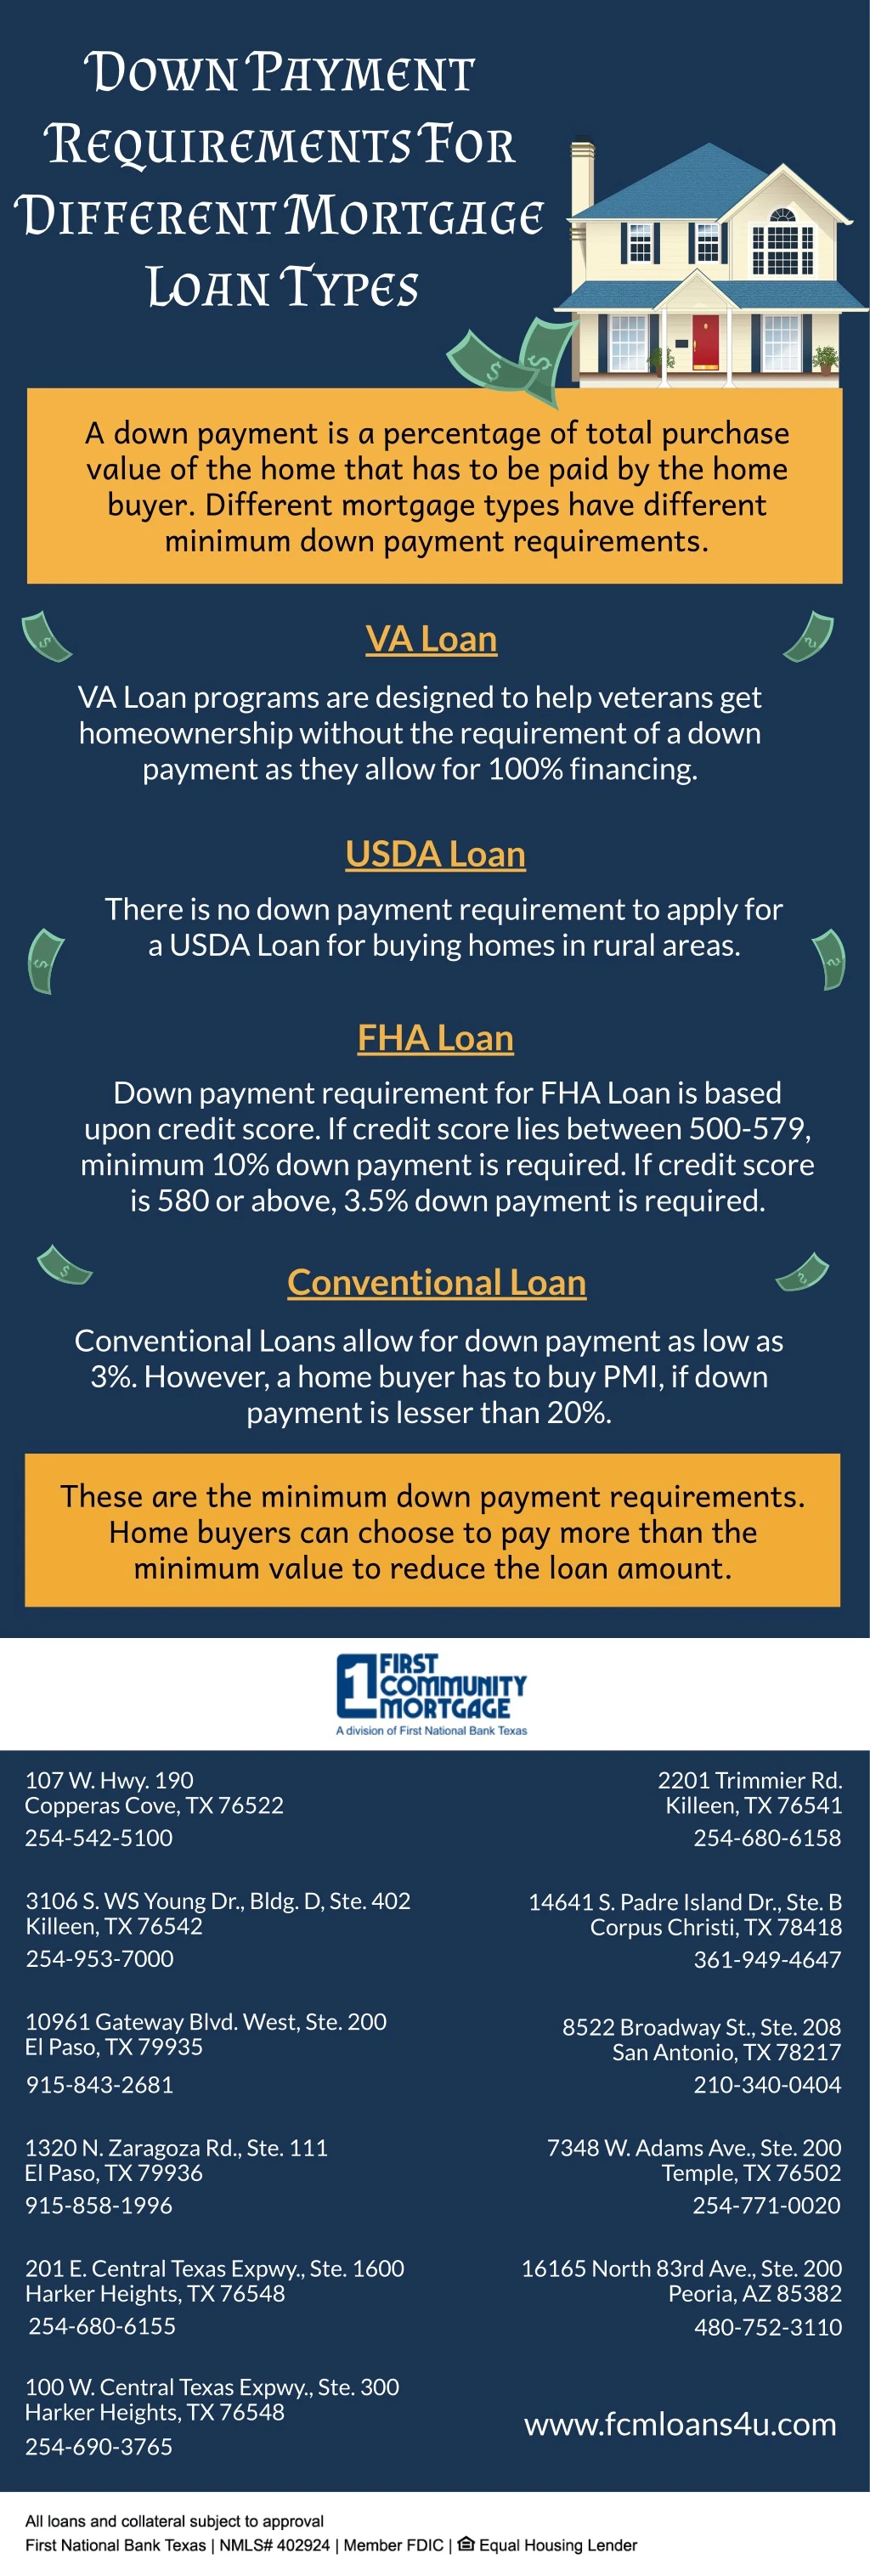 down payment requirements for different mortgage